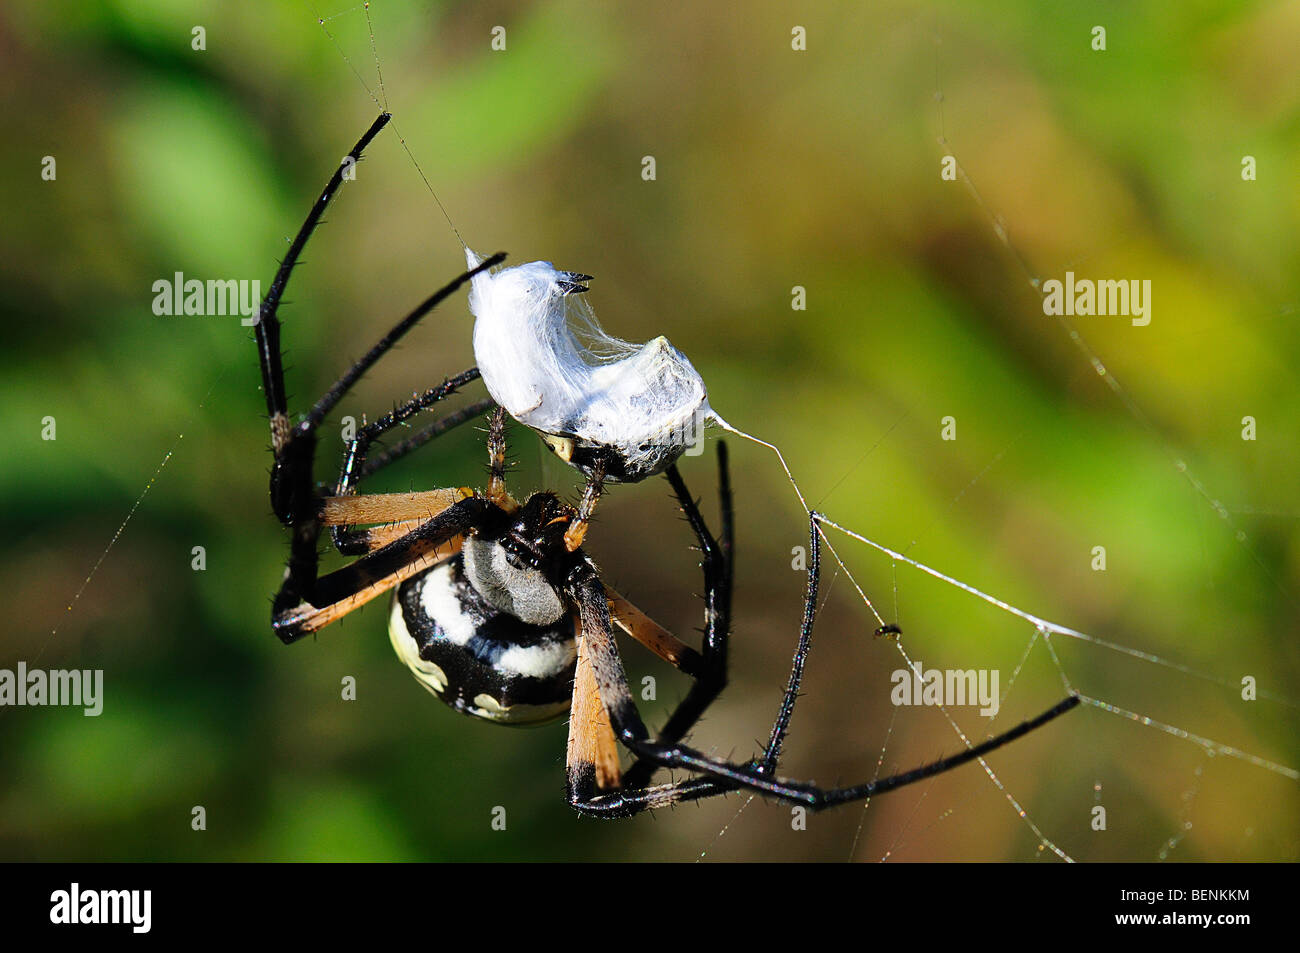 Yellow garden spider, insect caught in spider web Stock Photo